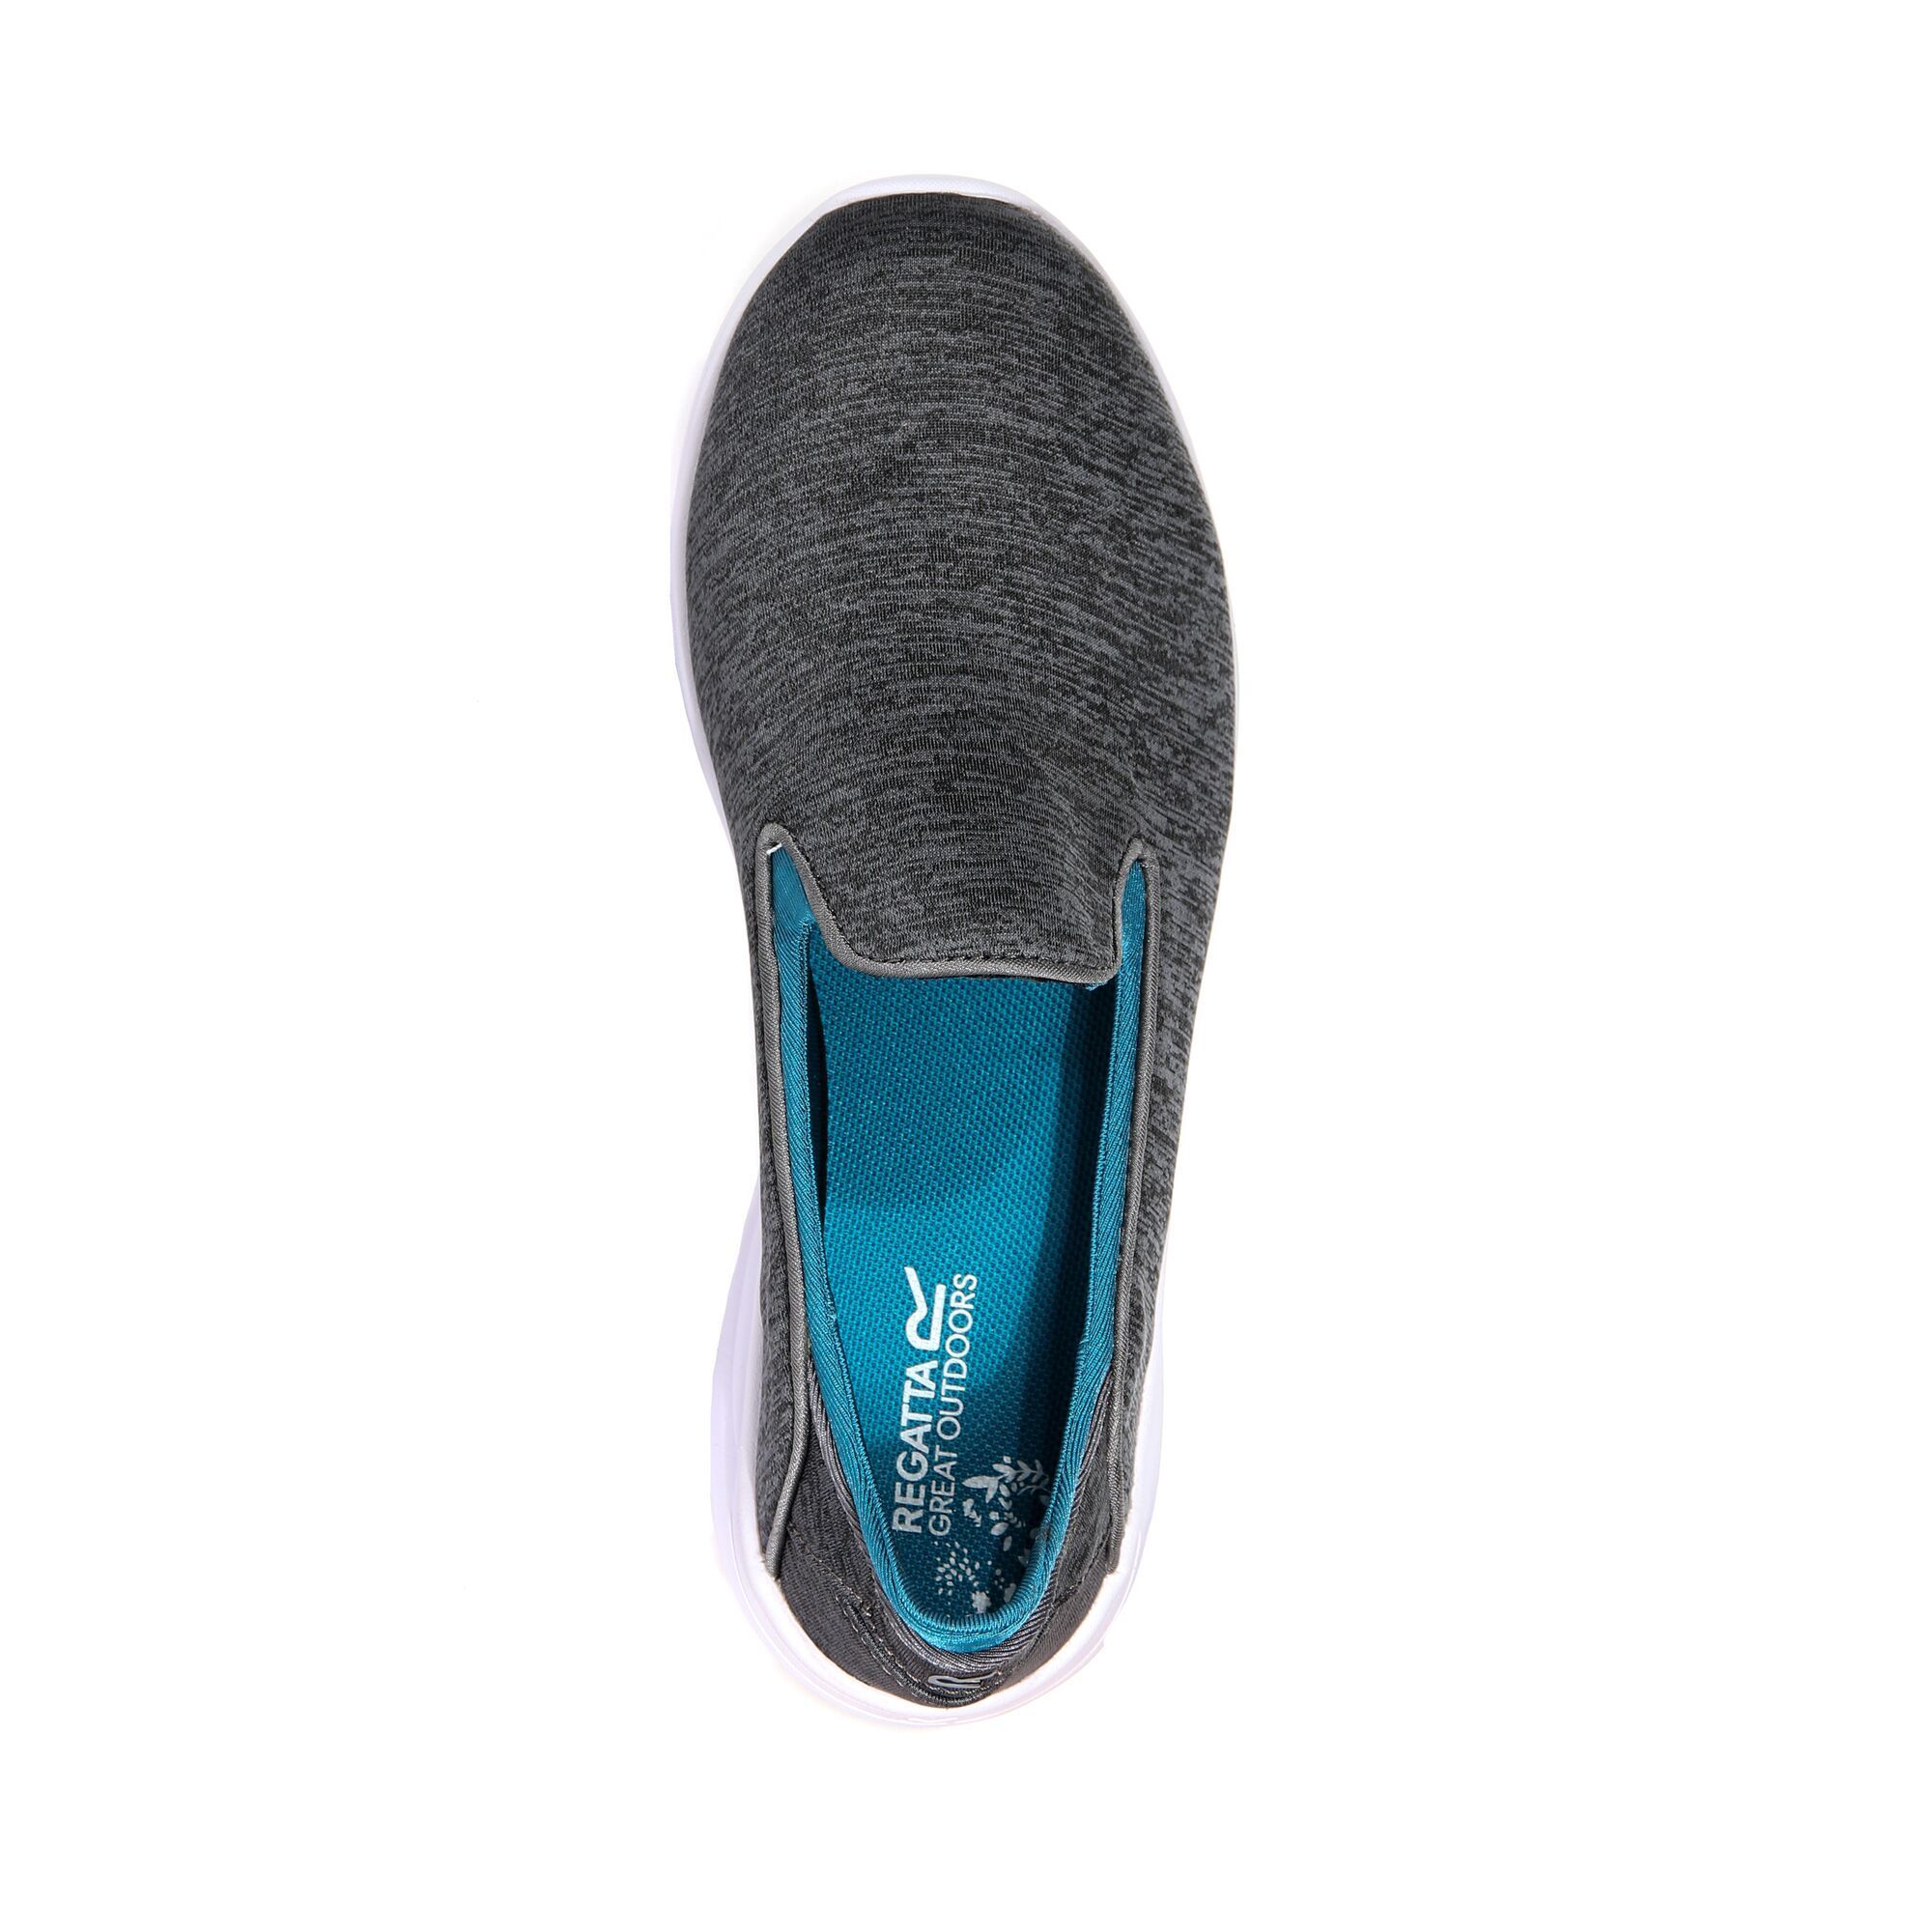 100% polyester. Slip on mesh upper for breathable comfort and easy on/off. Deep padded collar and tongue for all day comfort. Die cut EVA footbed for underfoot comfort and support. New XLT sole unit provides flexible and lightweight underfoot comfort.